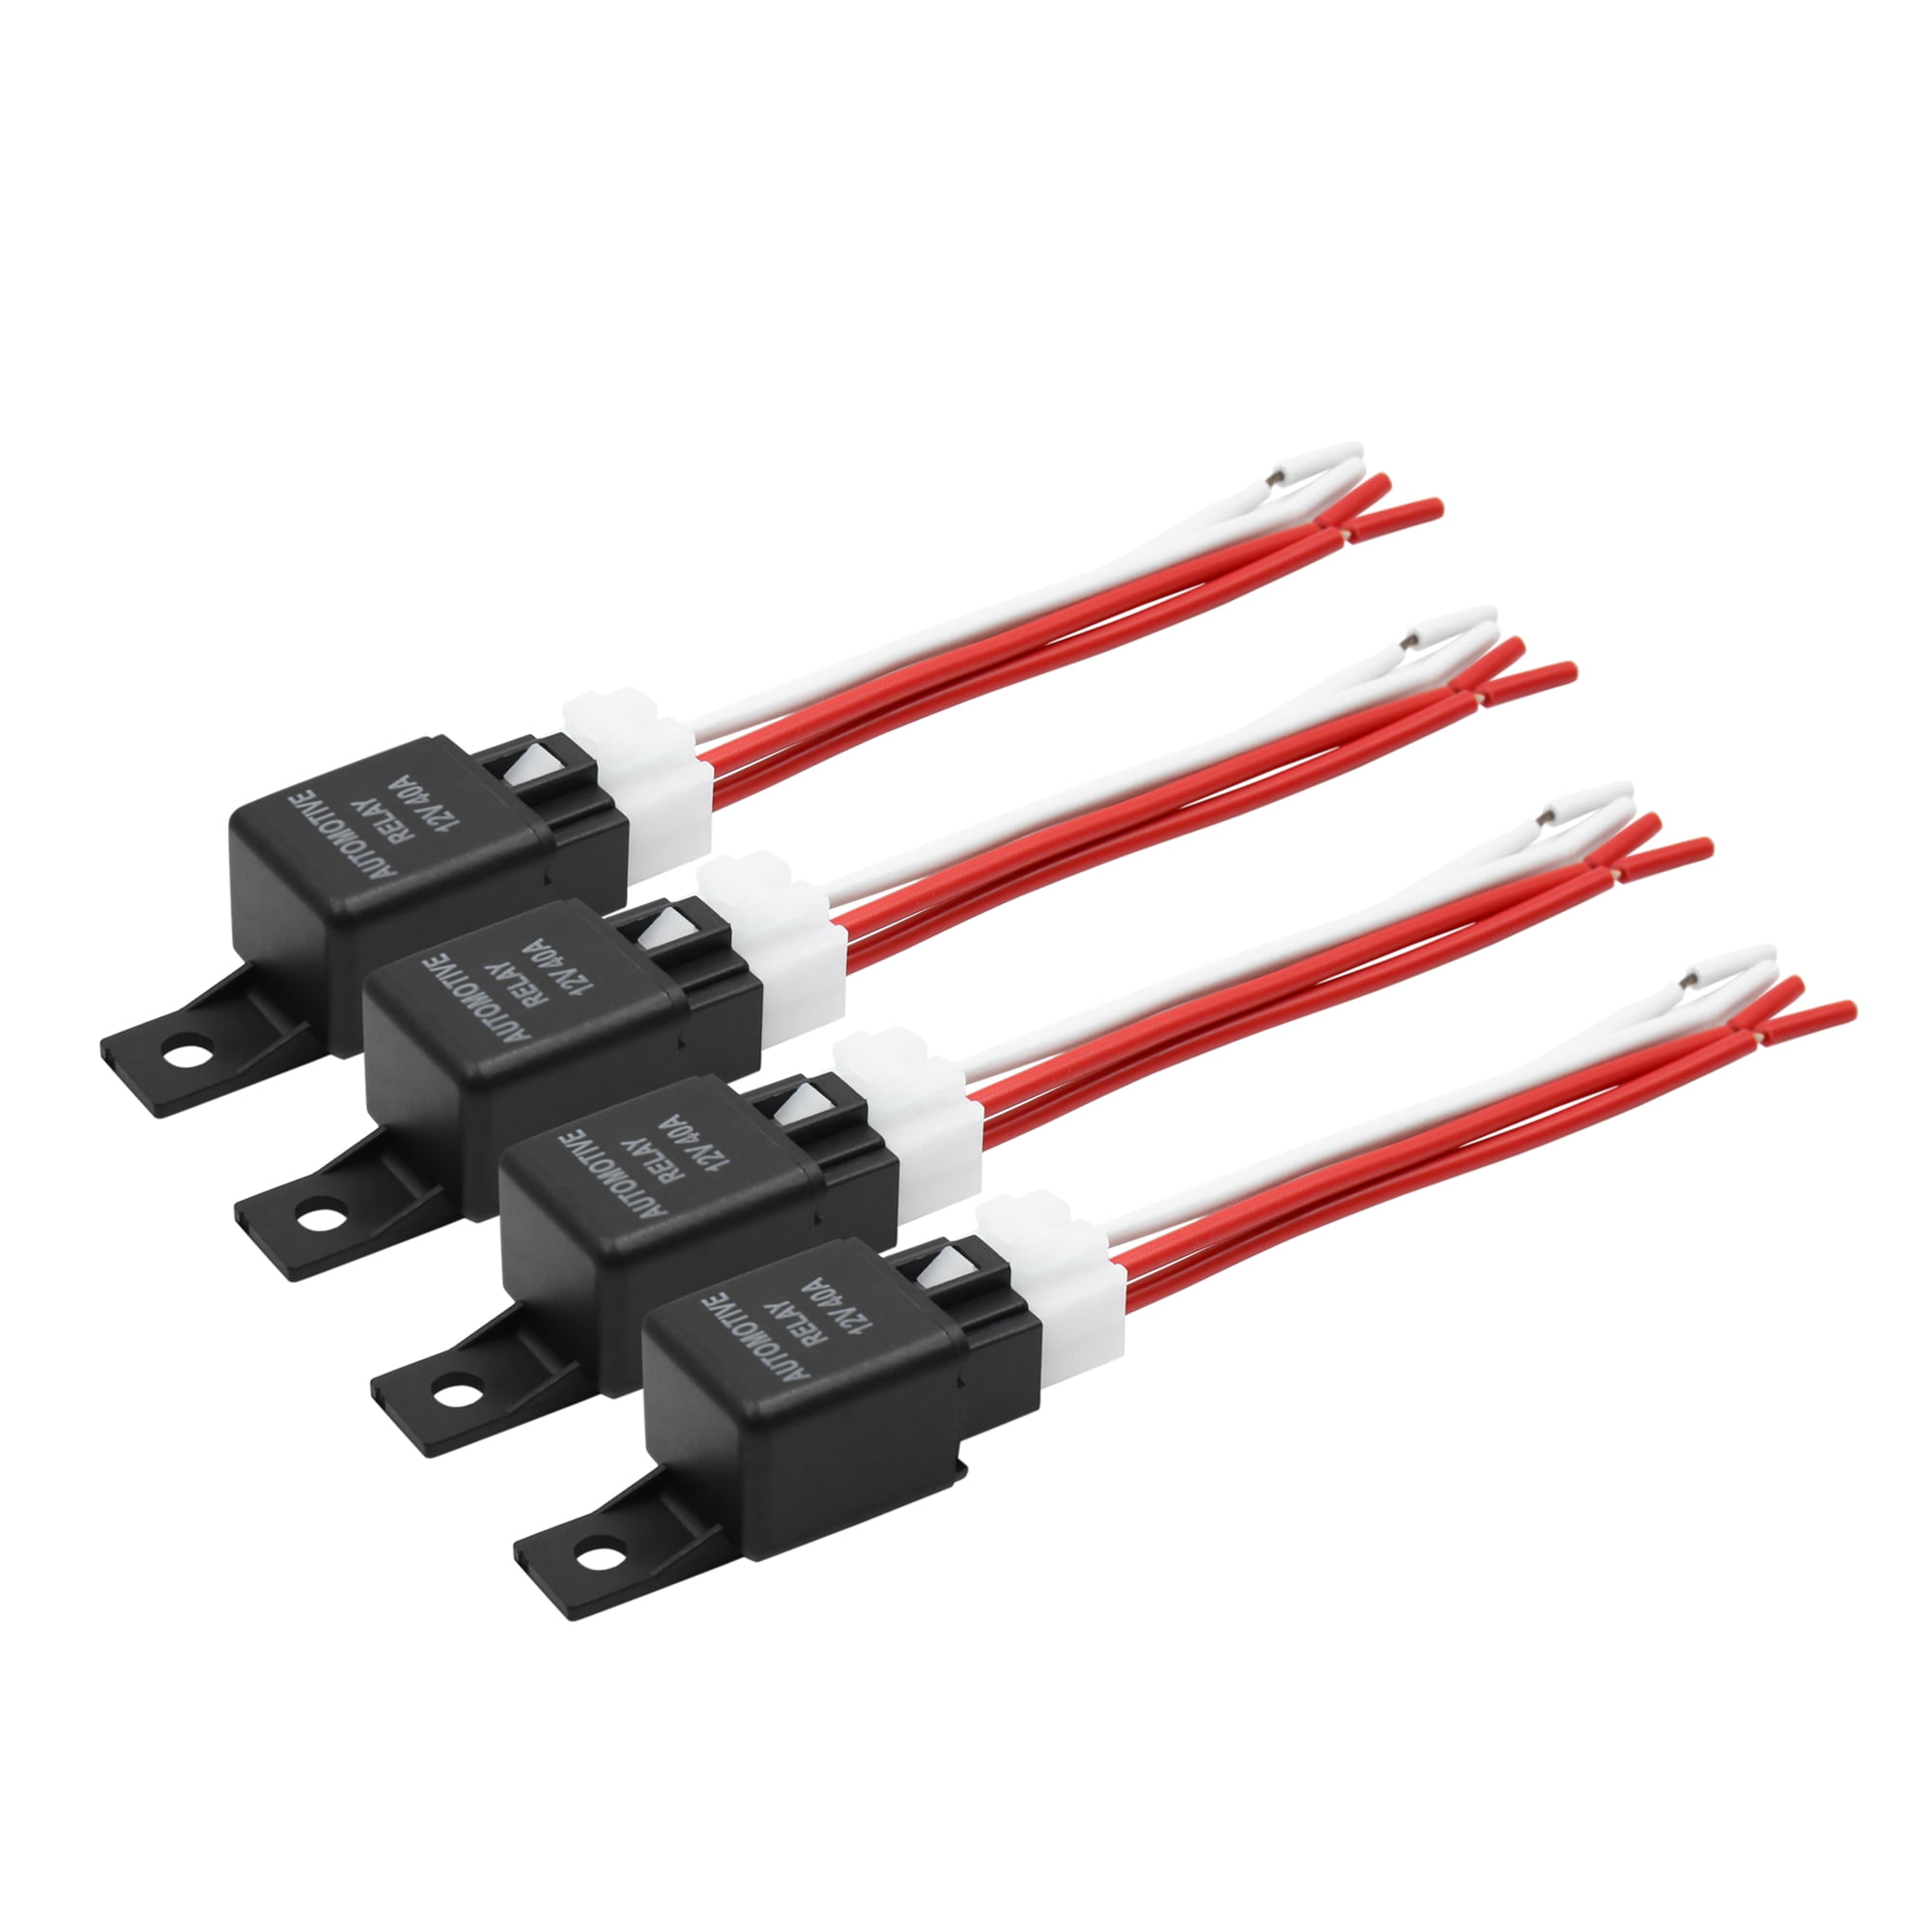 Uxcell a13112800ux1074 Car Auto Truck SPST 4 Pin Relay Plastic Socket Harness Wire 40A 12V DC